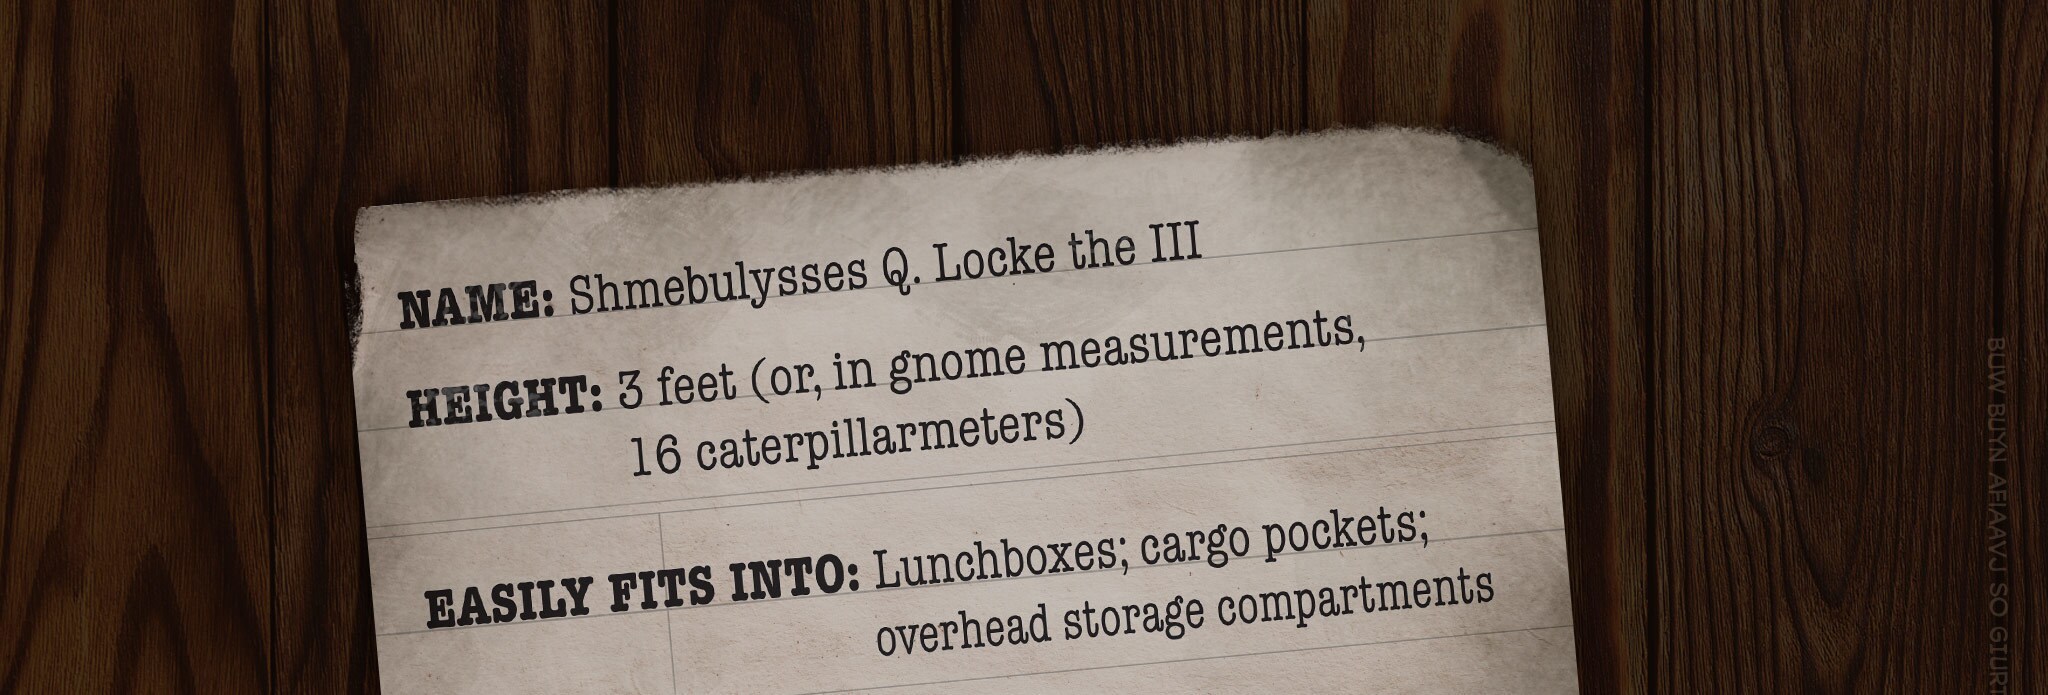 NAME: Shmebulysses Q. Locke the III HEIGHT: 3 feet (or, in gnome measurements, 16 caterpillarmeters) EASILY FITS INTO: Lunchboxes; cargo pockets; overhead storage compartments OFTEN MISTAKEN FOR: An old baby SHUNNED FROM: Greasy’s Diner/Society ARCHENEMY: Xgqrthx the Vowelless, a dark warlock who got in a fight with Shmebulock over whose beard was grayer and cursed him to only speak his own name. The curse can only be defeated if Shmebulock casts the Orb of Elvynmore into the Chasm of Garlock, but the orb is superheavy, and, like, the Chasm of Garlock is a major commute.